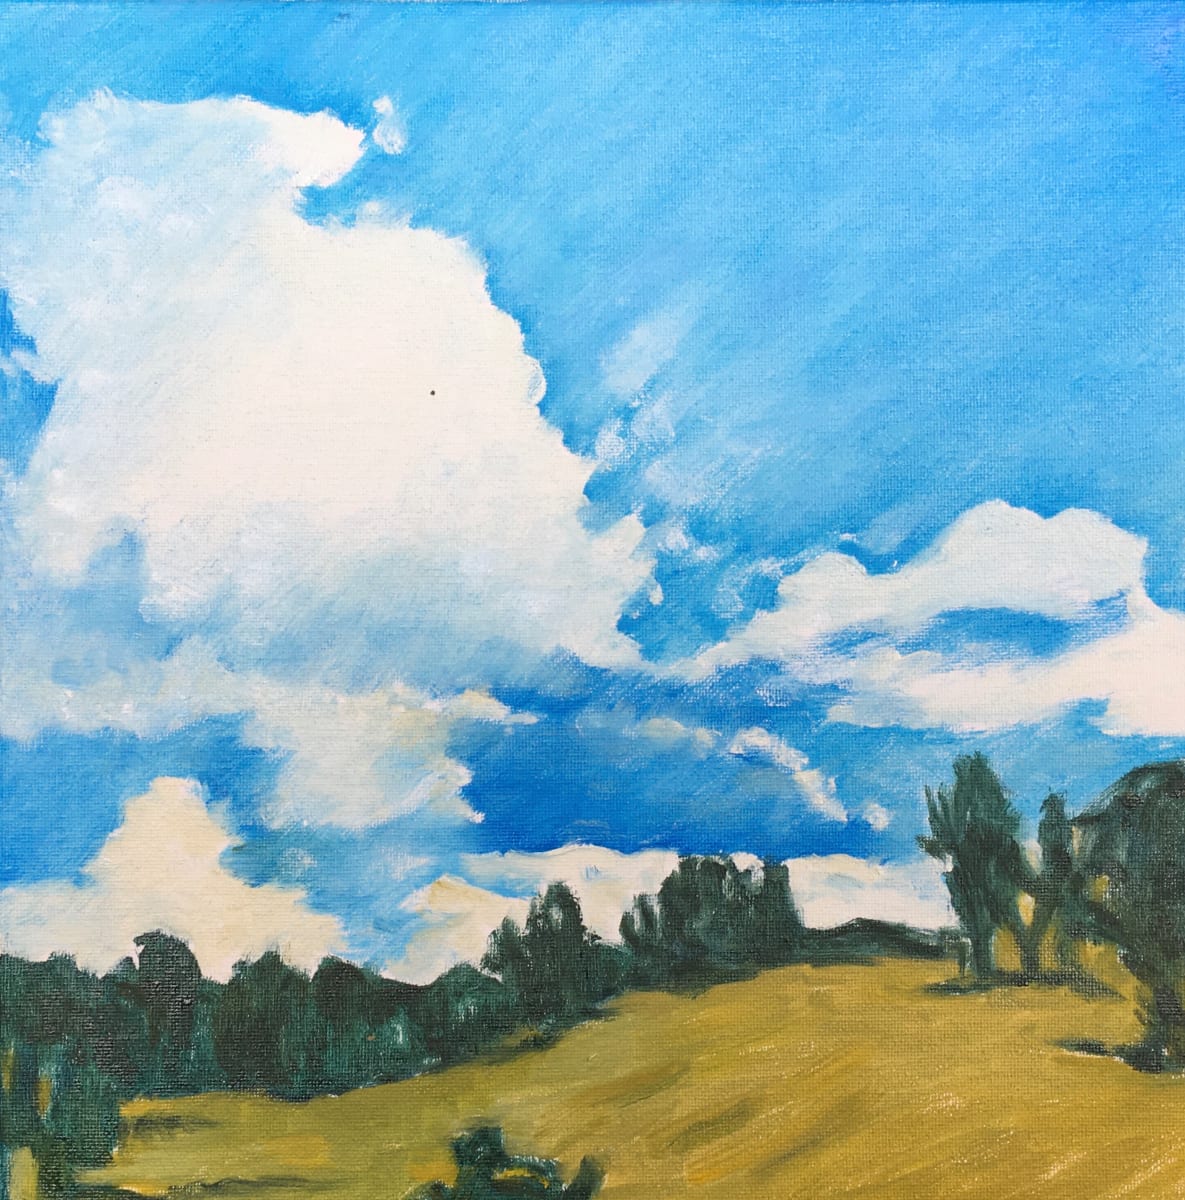 Gathering Clouds by Susan Miller  Image: Gathering Clouds by Susan Miller